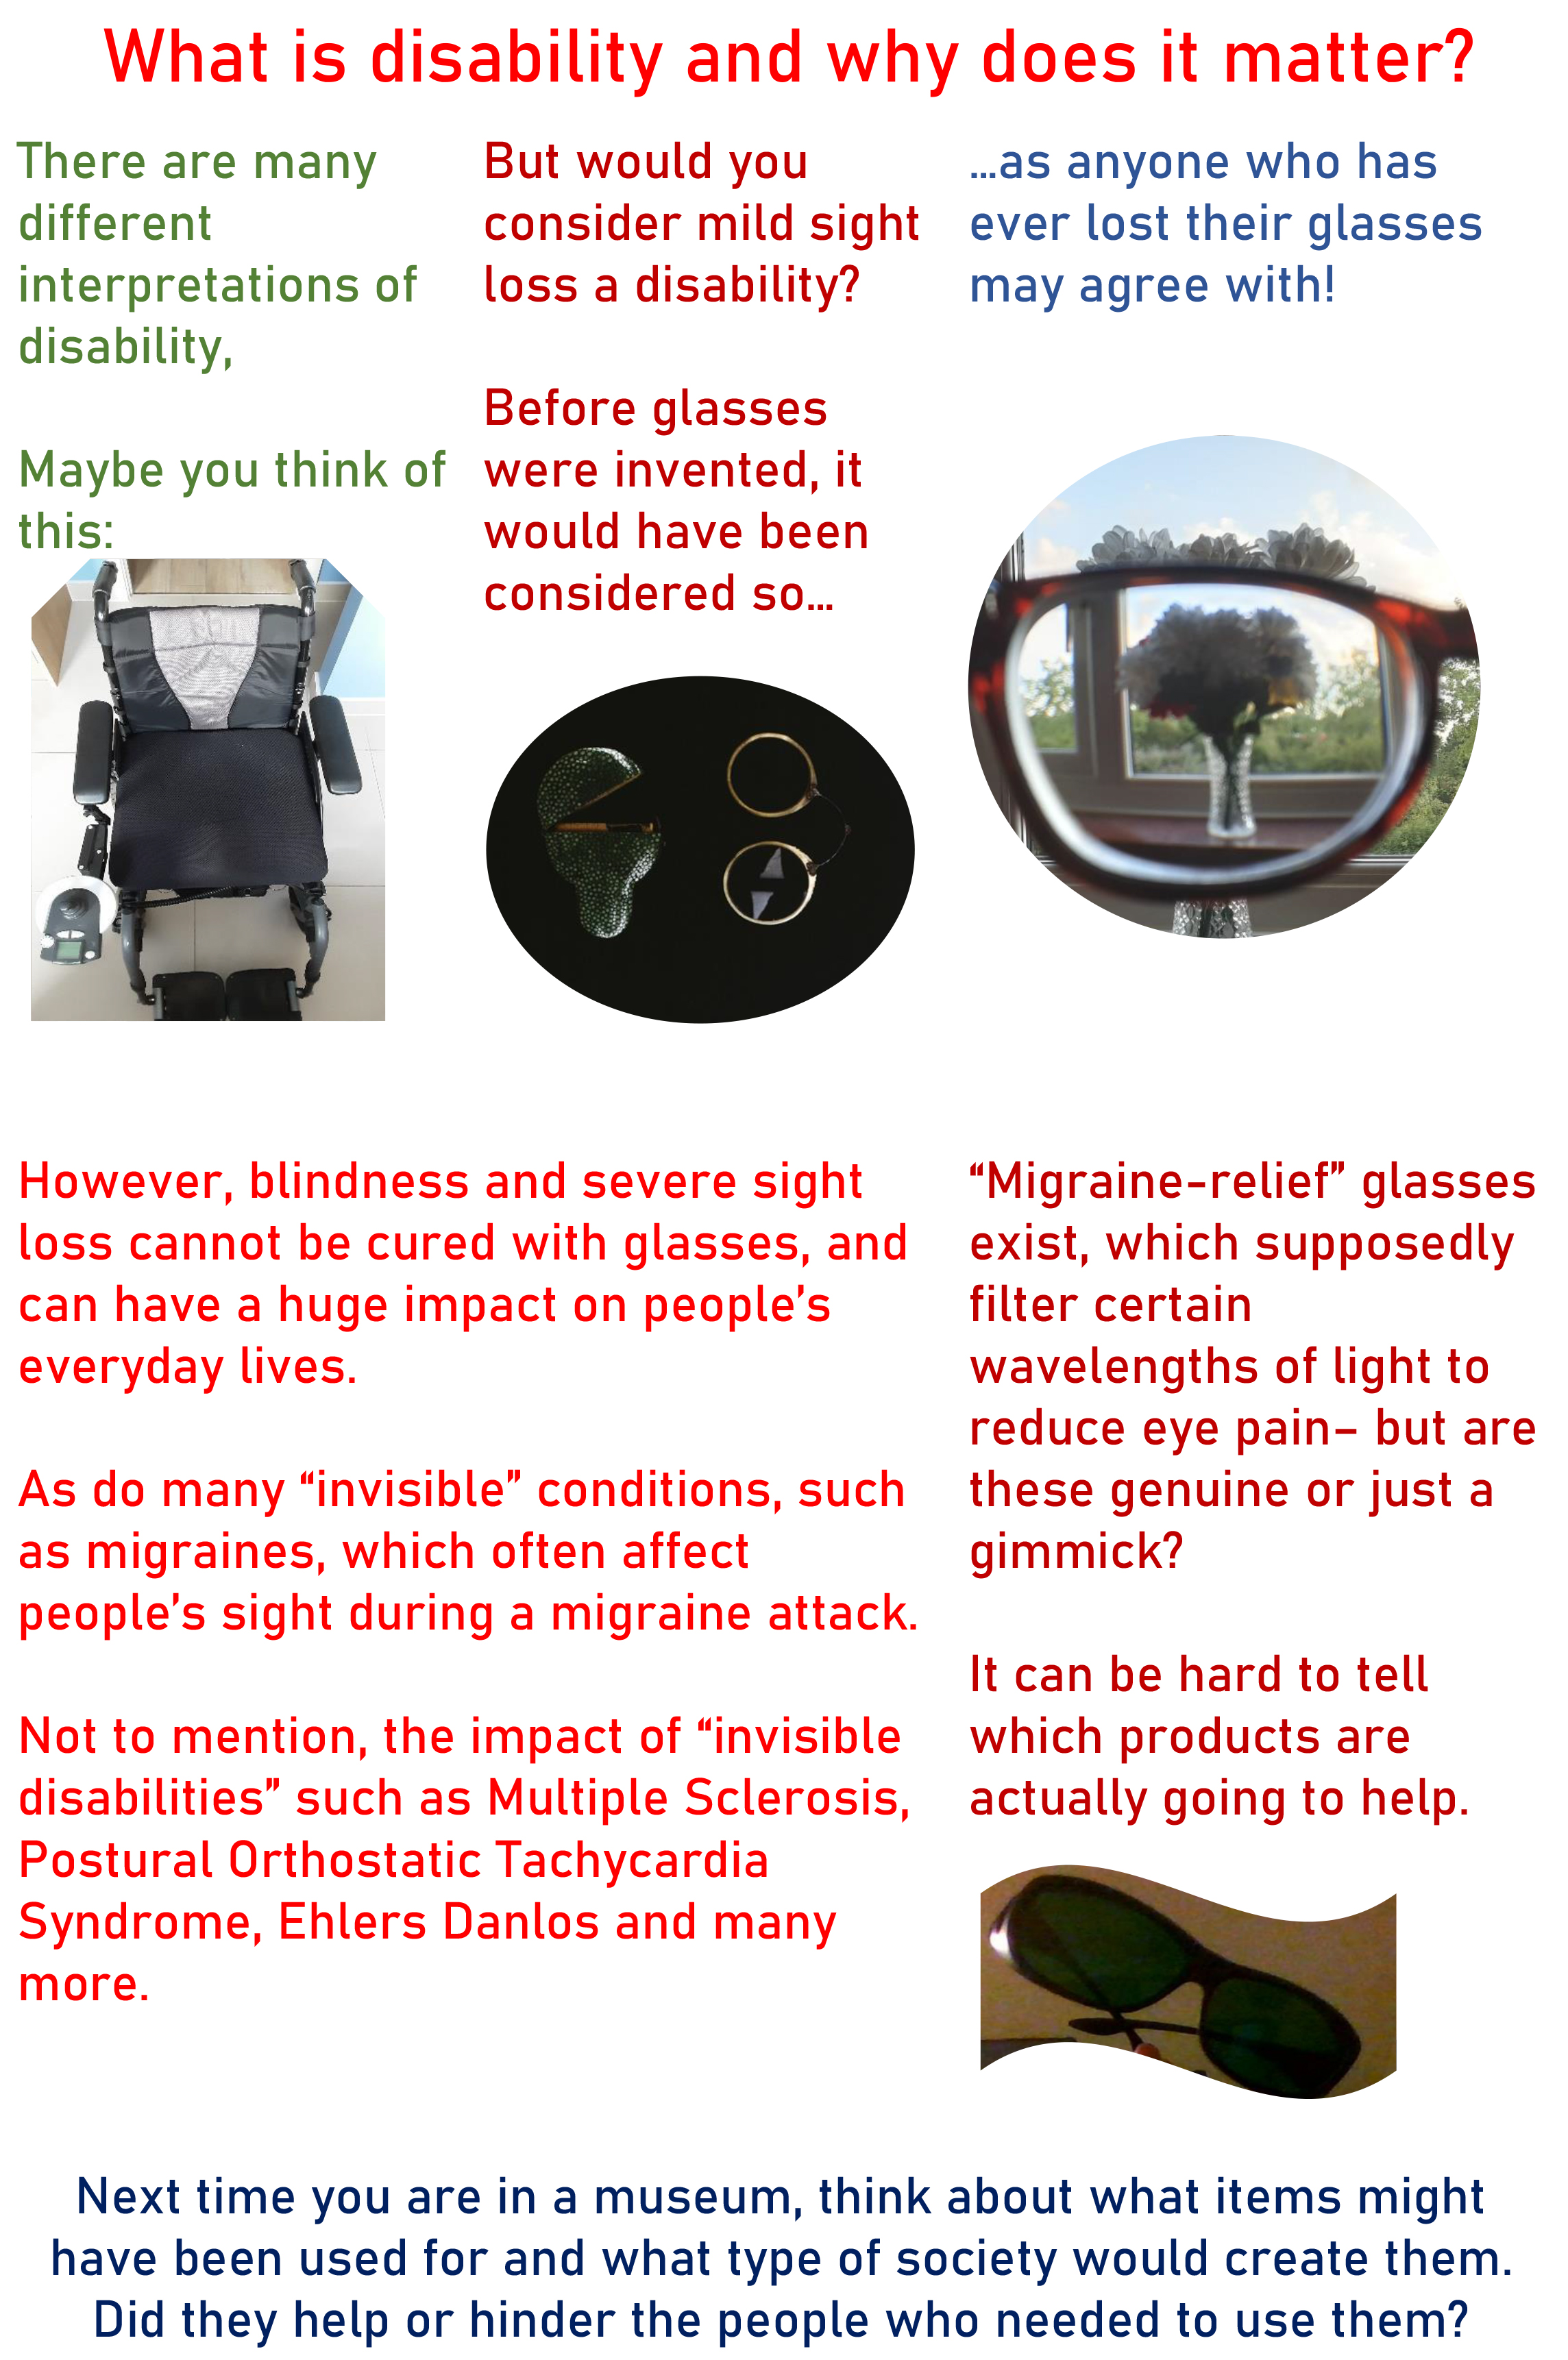 A4 poster with colourful text against a white background, and images inset.  The first section of text is in three columns. The writing is a different colour in each column. It reads: "What is disability and why does it matter? There are many different interpretations of disability. Maybe you think of this: [picture of a wheelchair]. But would you consider mild sight loss a disability? Before glasses were invented, it would have been considered so... [photo of gold-rimmed 18th century spectacles, with their small leather case] ... as anyone who has ever lost their glasses may agree with!" The second section of text is in two columns. It says, "However, blindness and severe sight loss cannot be cured with glasses, and can have a huge impact on people’s everyday lives. As do many “invisible” conditions, such as migraines, which often affect people’s sight during a migraine attack. Not to mention, the impact of “invisible disabilities” such as Multiple Sclerosis, Postural Orthostatic Tachycardia Syndrome, Ehlers Danlos and many more. “Migraine-relief” glasses exist, which supposedly filter certain wavelengths of light to reduce eye pain– but are these genuine or just a gimmick? It can be hard to tell which products are actually going to help." [Photo of a pair of miraine relief glasses. They are large plastic glasses with dark lenses.] The final section of text runs along the bottom of the page. It says, "Next time you are in a museum, think about what items might have been used for and what type of society would create them. Did they help or hinder the people who needed to use them?"